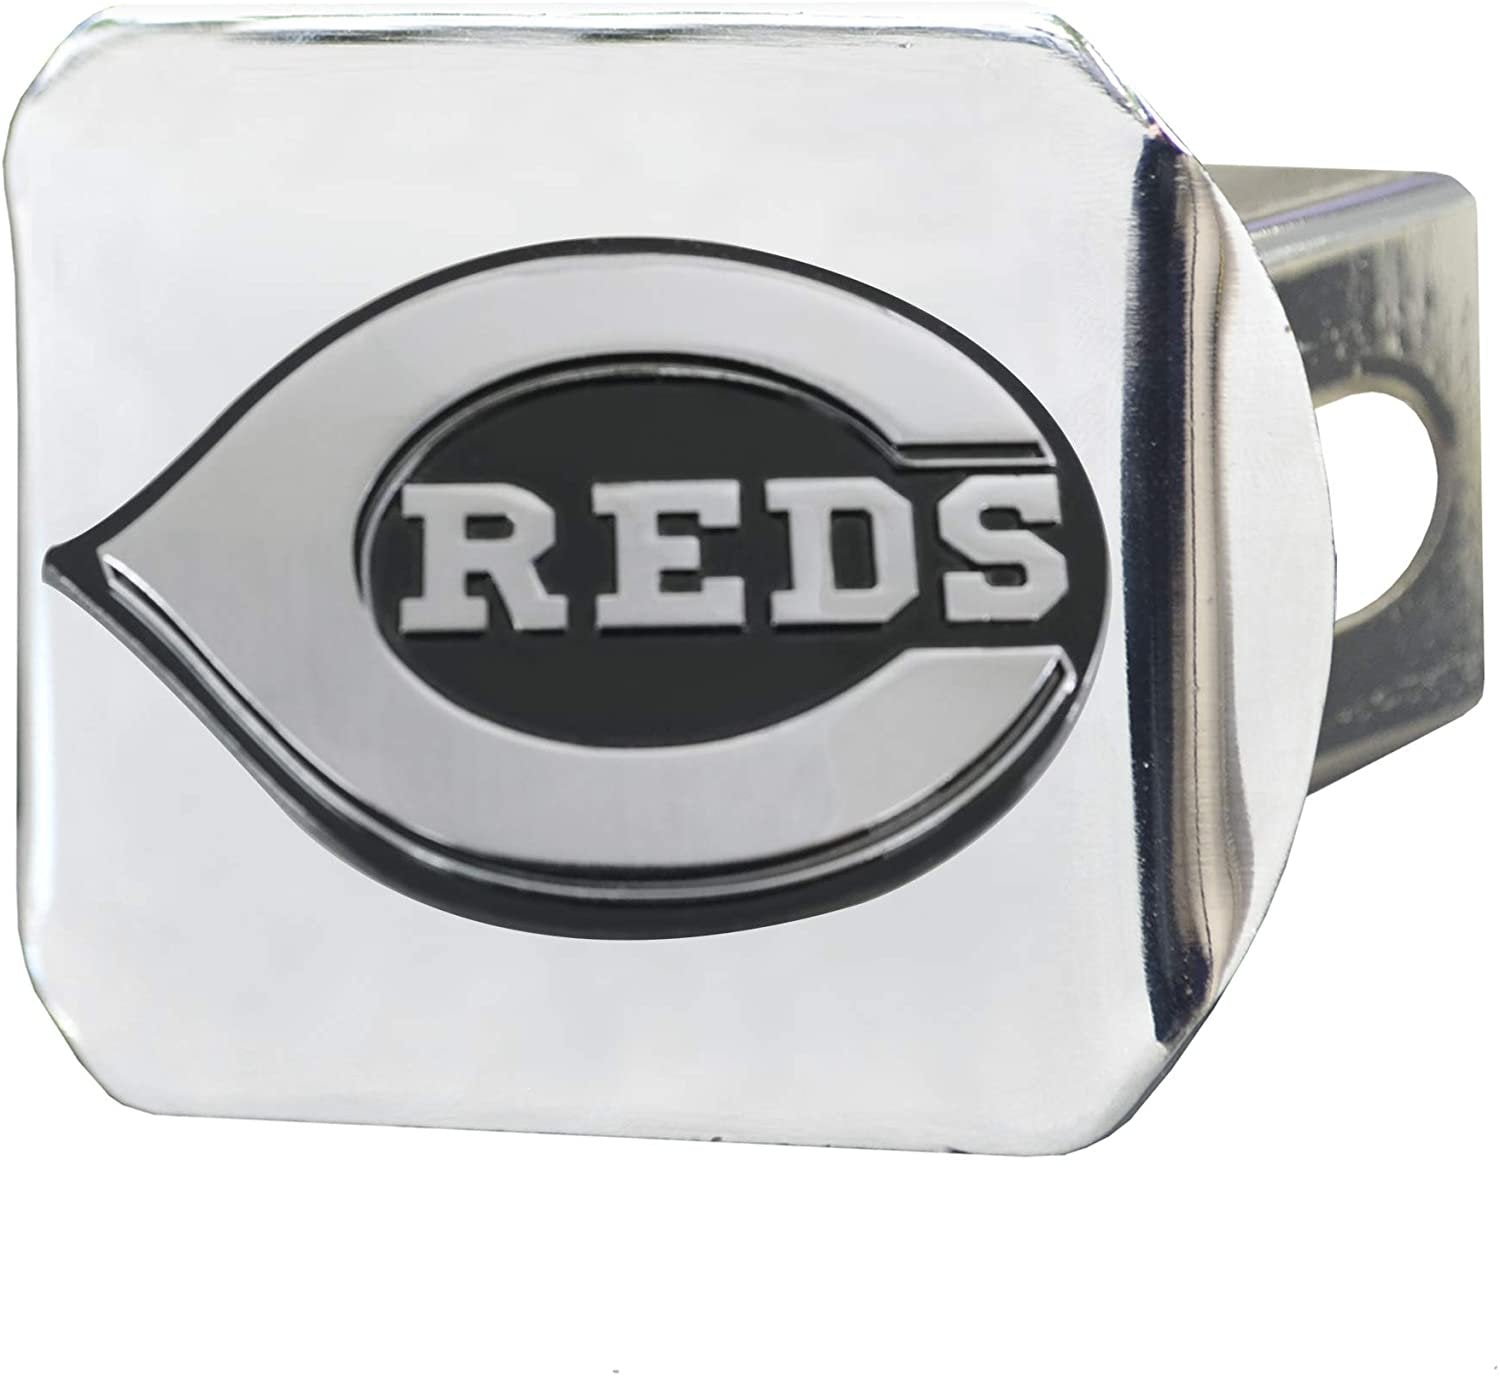 Cincinnati Reds Solid Metal Hitch Cover with Chrome Metal Emblem 2 Inch Square Type III